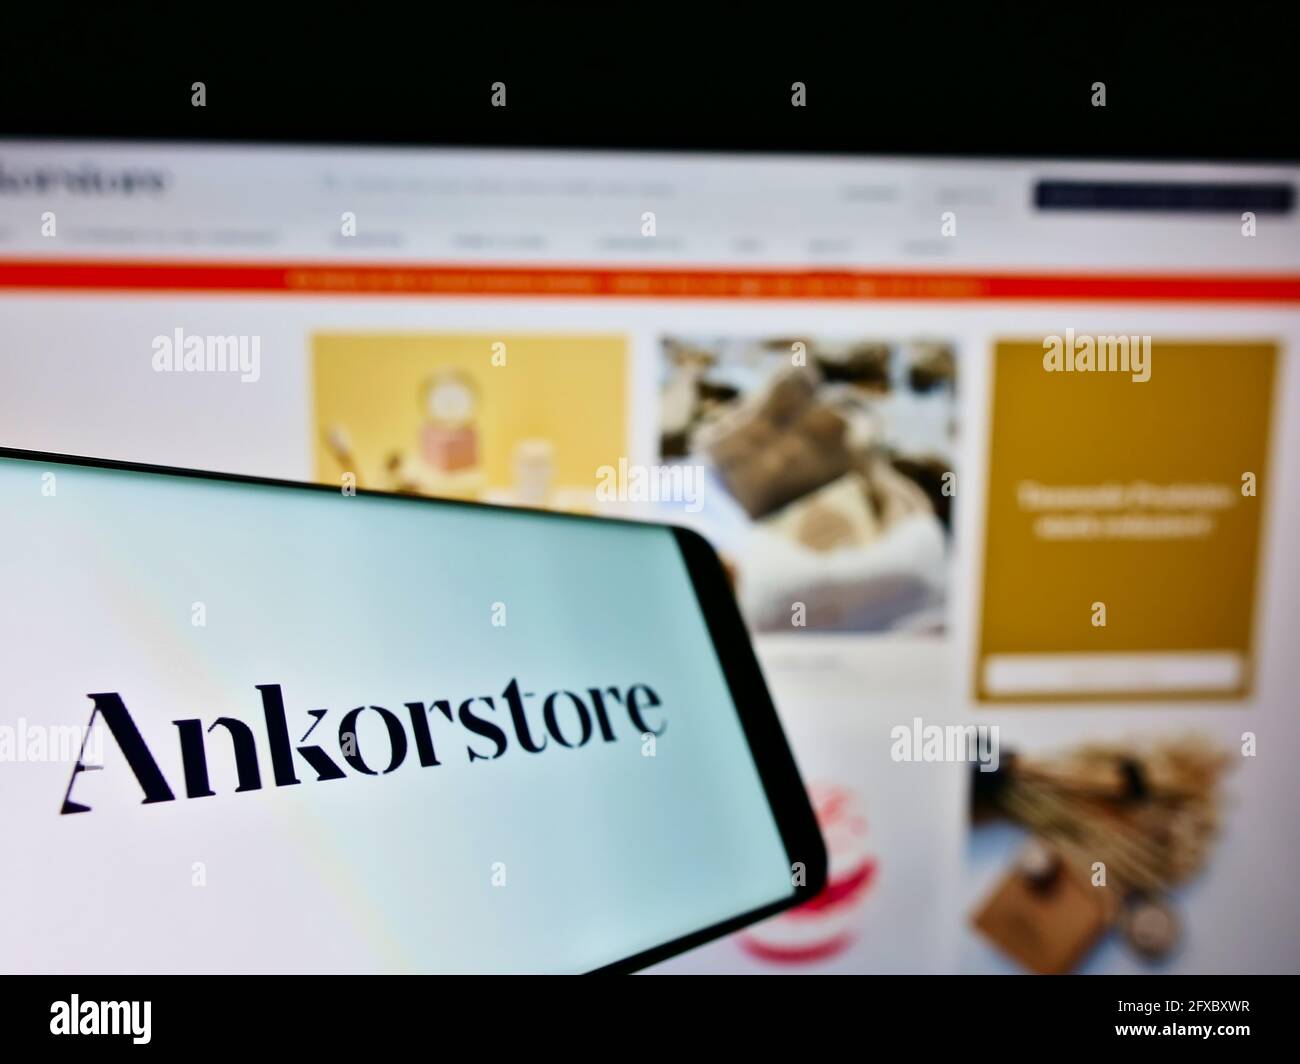 Smartphone with logo of French B2B marketplace company Ankorstore SAS on screen in front of company website. Focus on center-left of phone display. Stock Photo